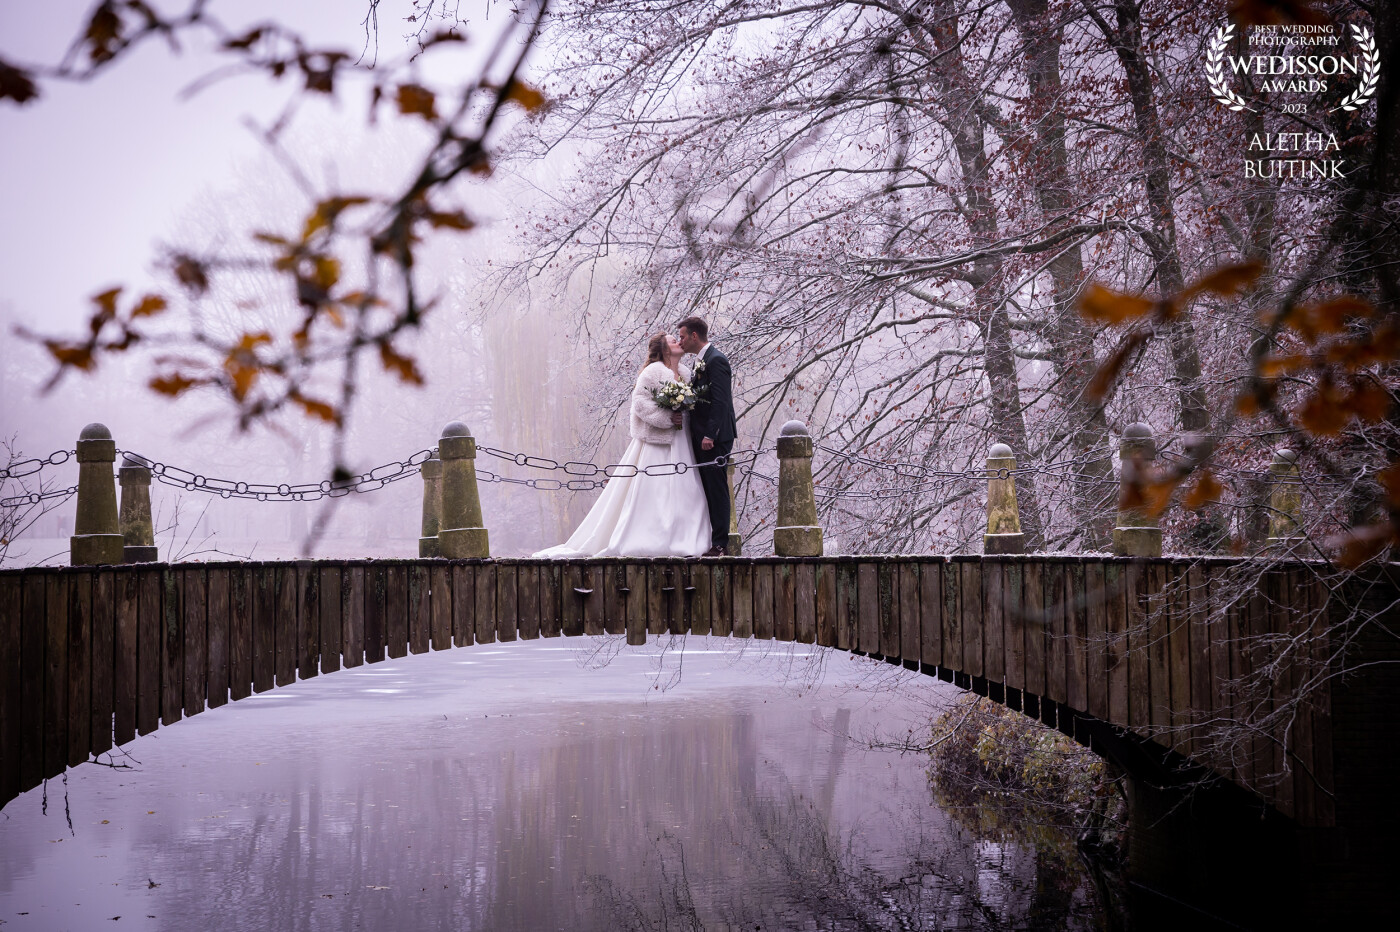 The 10th of December it was icy cold. The photoshoot took place at a nearby forest and right at the beginning was this beautiful bridge. As soon as I saw this I knew this photo had to be taken. The red-brown leaves against the icy sky created a wonderful mysterious atmosphere and the kissing bridal couple completed the picture.